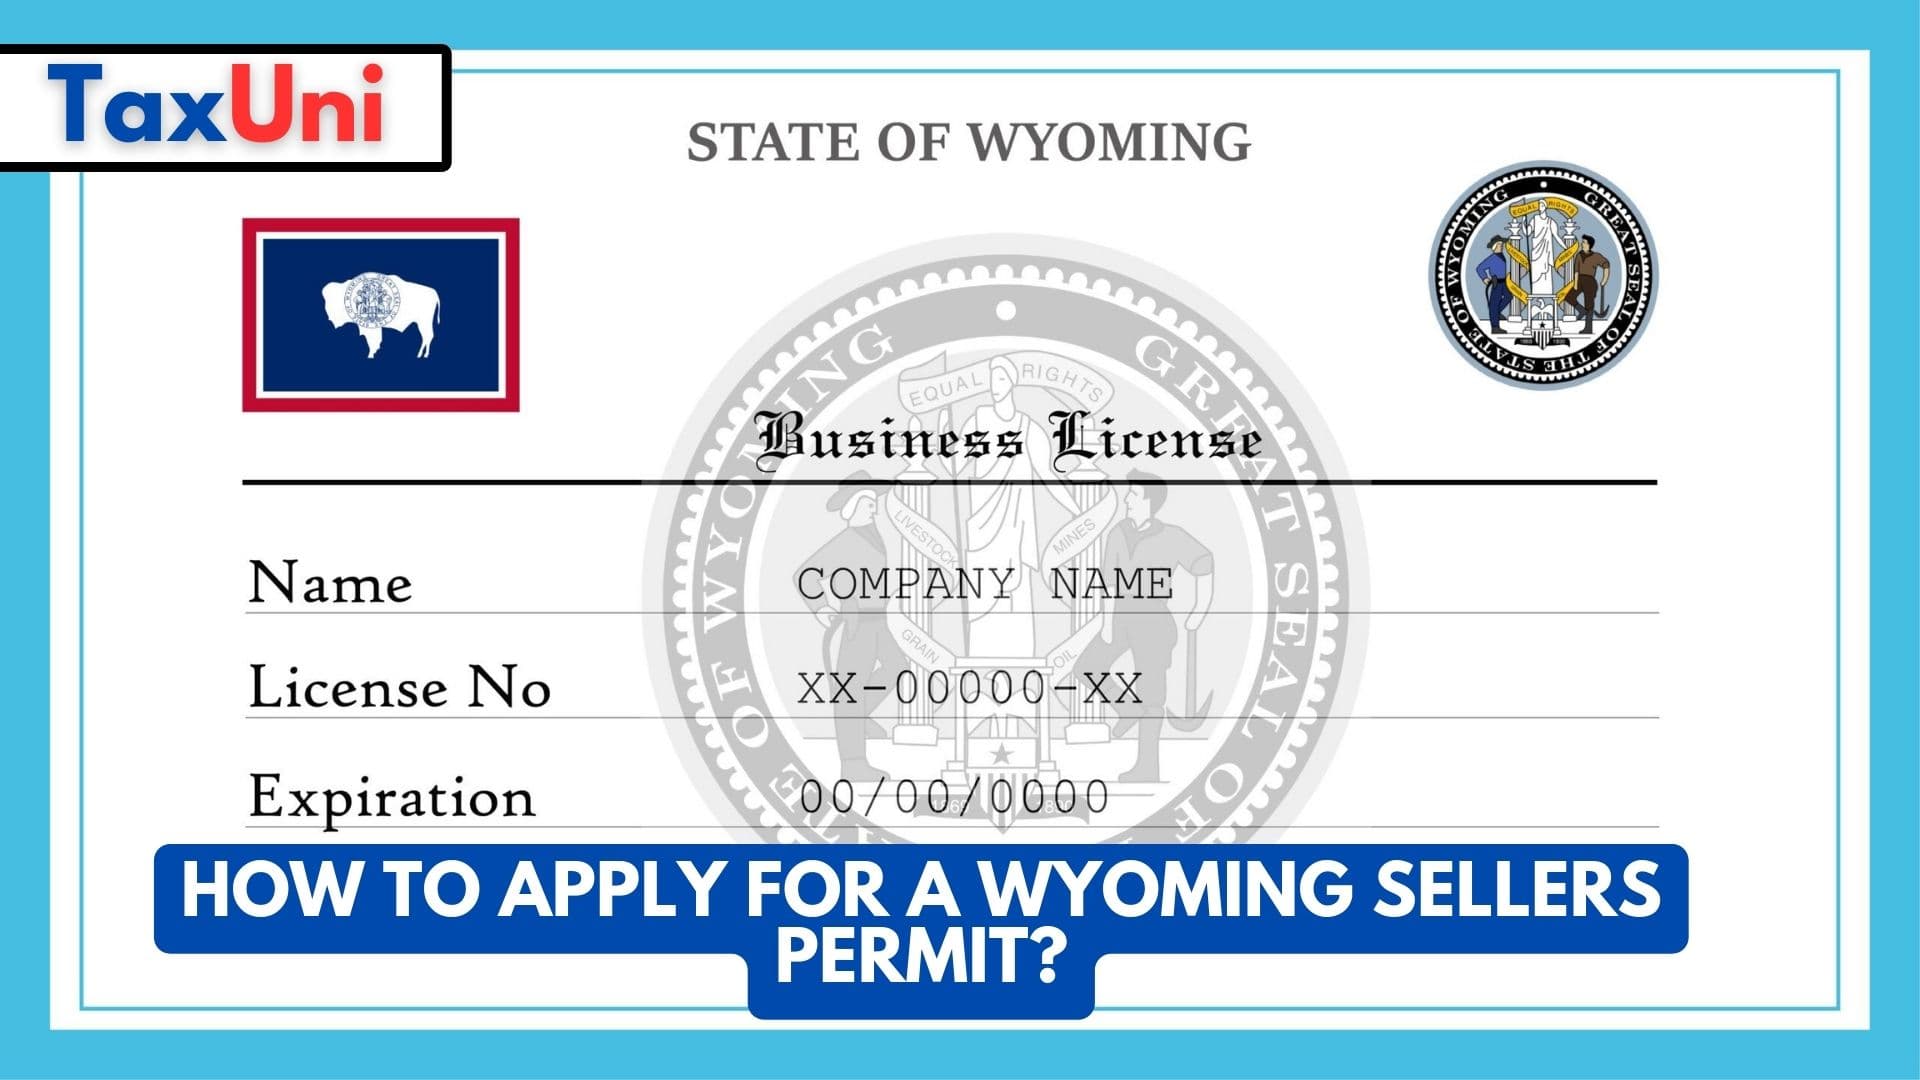 How to Apply for a Wyoming Sellers Permit